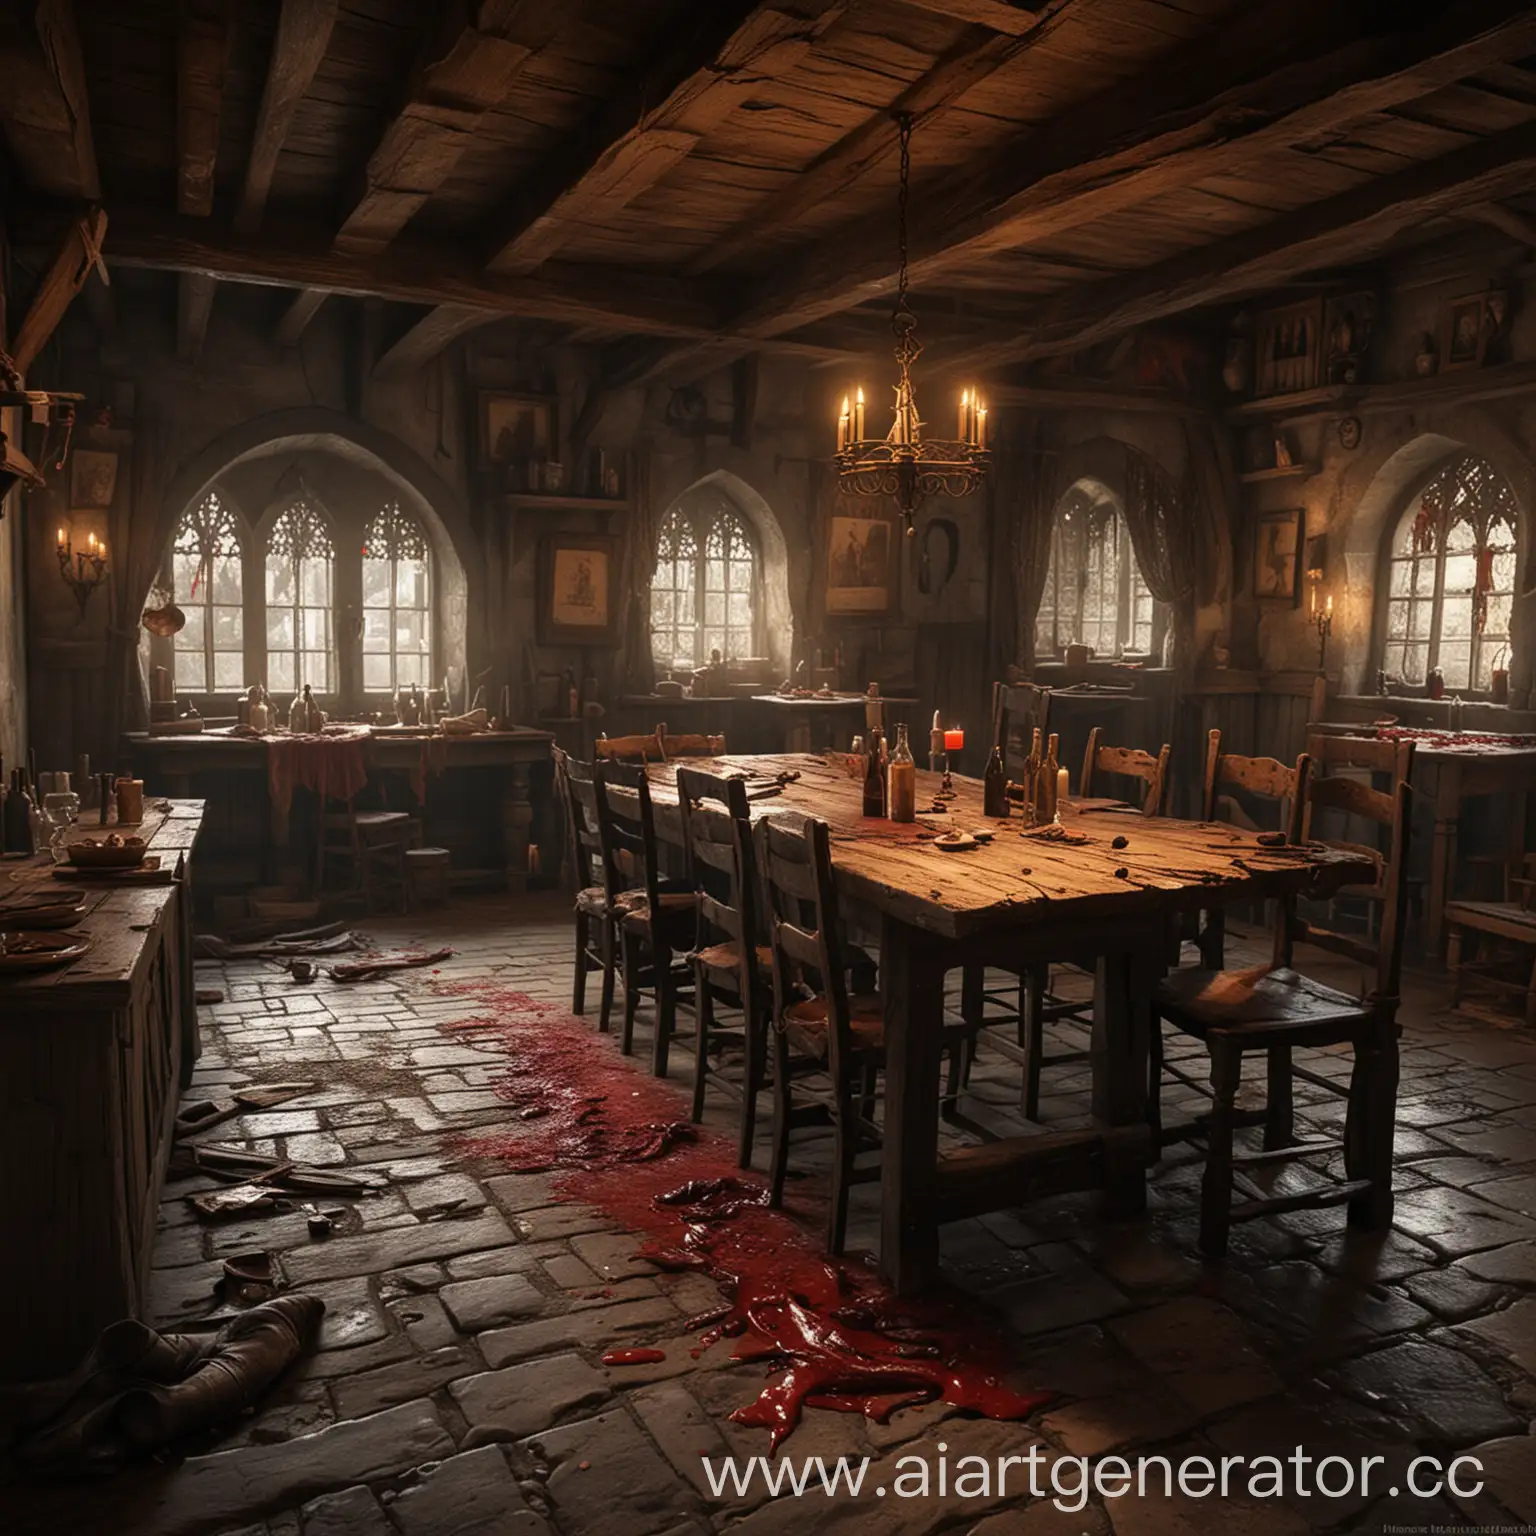 Medieval-Tavern-Scene-with-Bloodstains-and-Abandoned-Visitors-Belongings